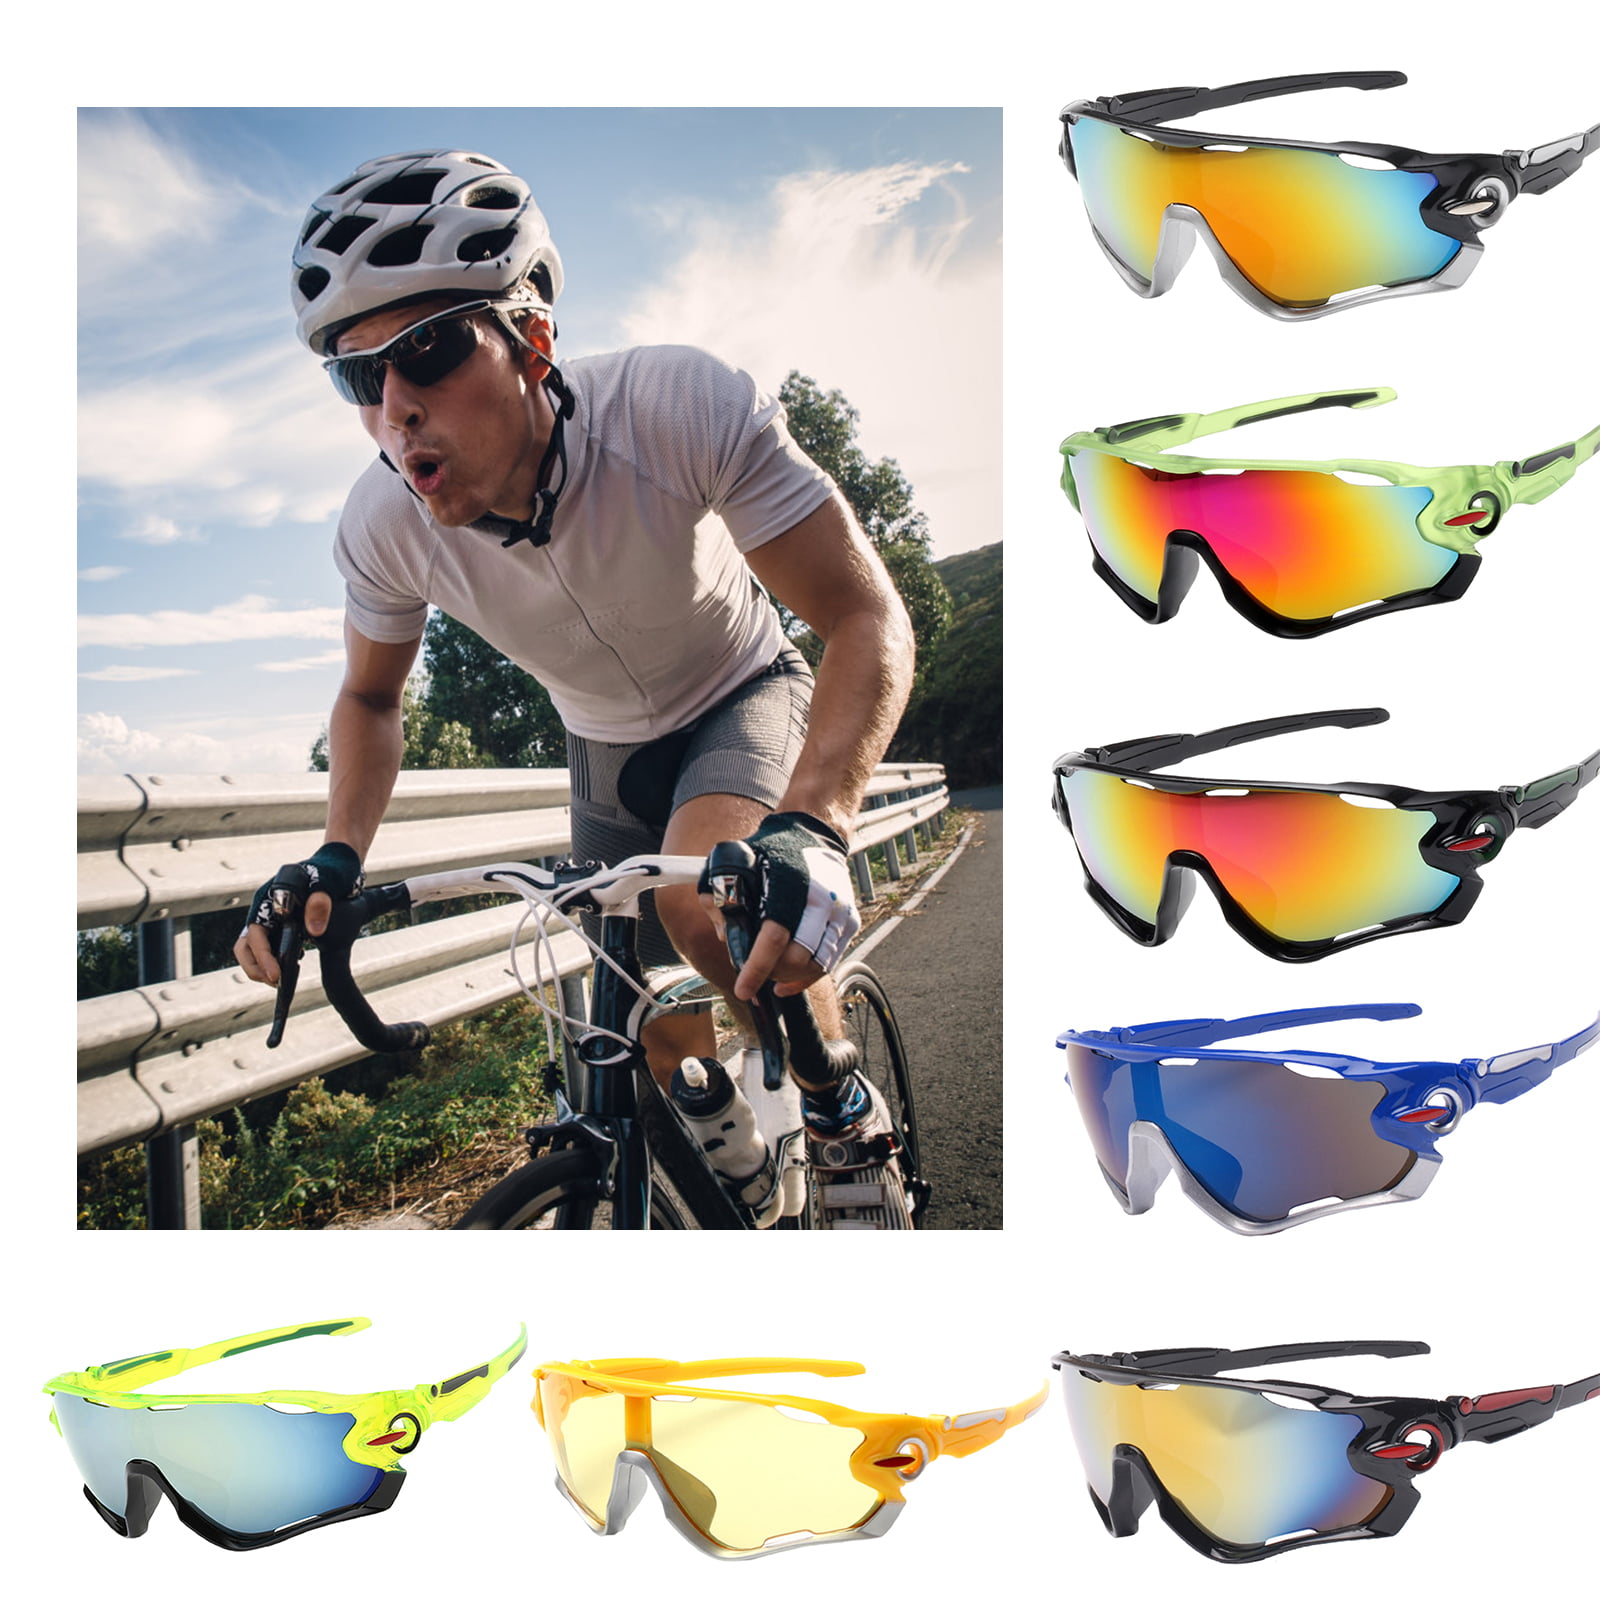 Hot Cycling Sunglasses Bike Casual Sports Outdoor Glasses Bicycle Goggles UV400 